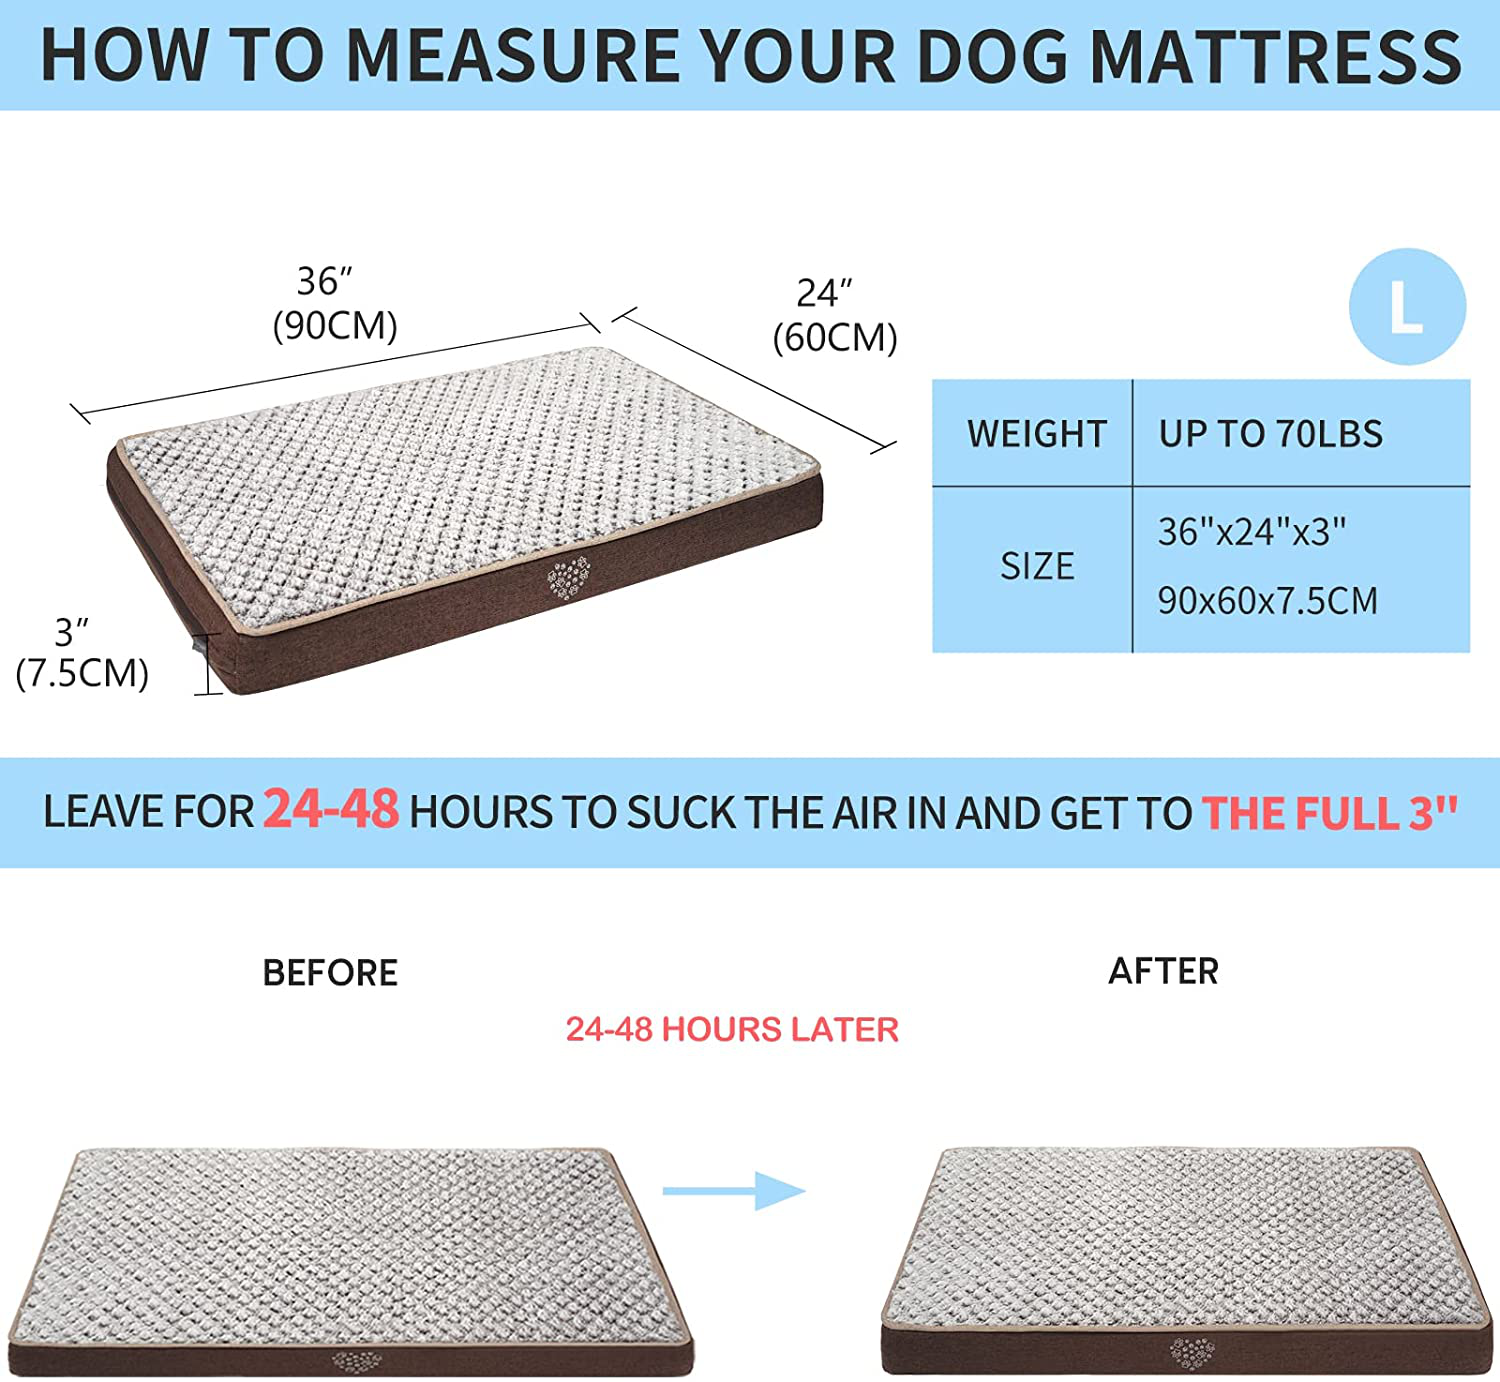 VANKEAN Stylish Reversible Dog Mat (Warm and Cool), Waterproof Inner Lining, Removable Machine Washable Cover, Plush Dog Mattress for Joint Relief Dog Bed for Crate, Coffee